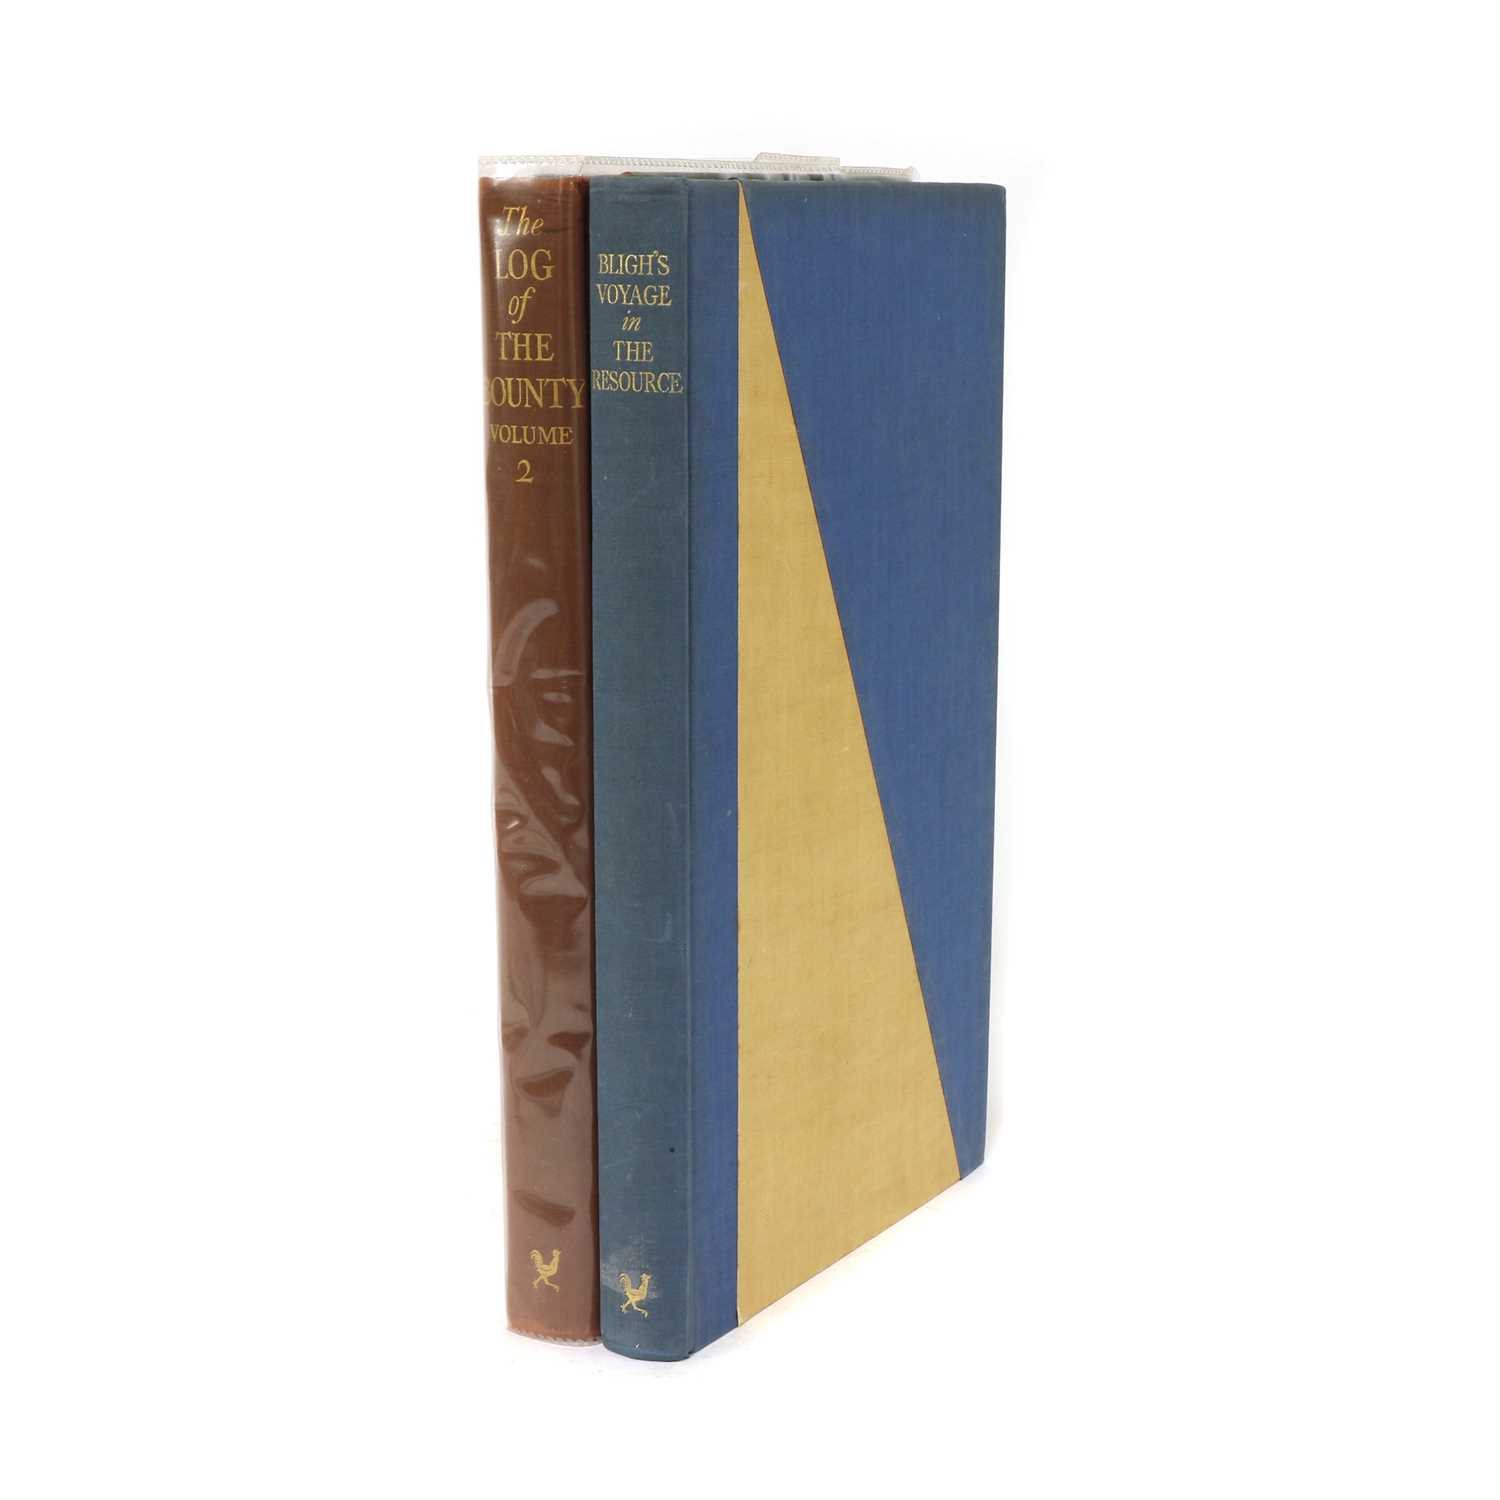 Lot 104 - GOLDEN COCKREL PRESS: 1- BLIGH S VOYAGES IN THE RESOURCE